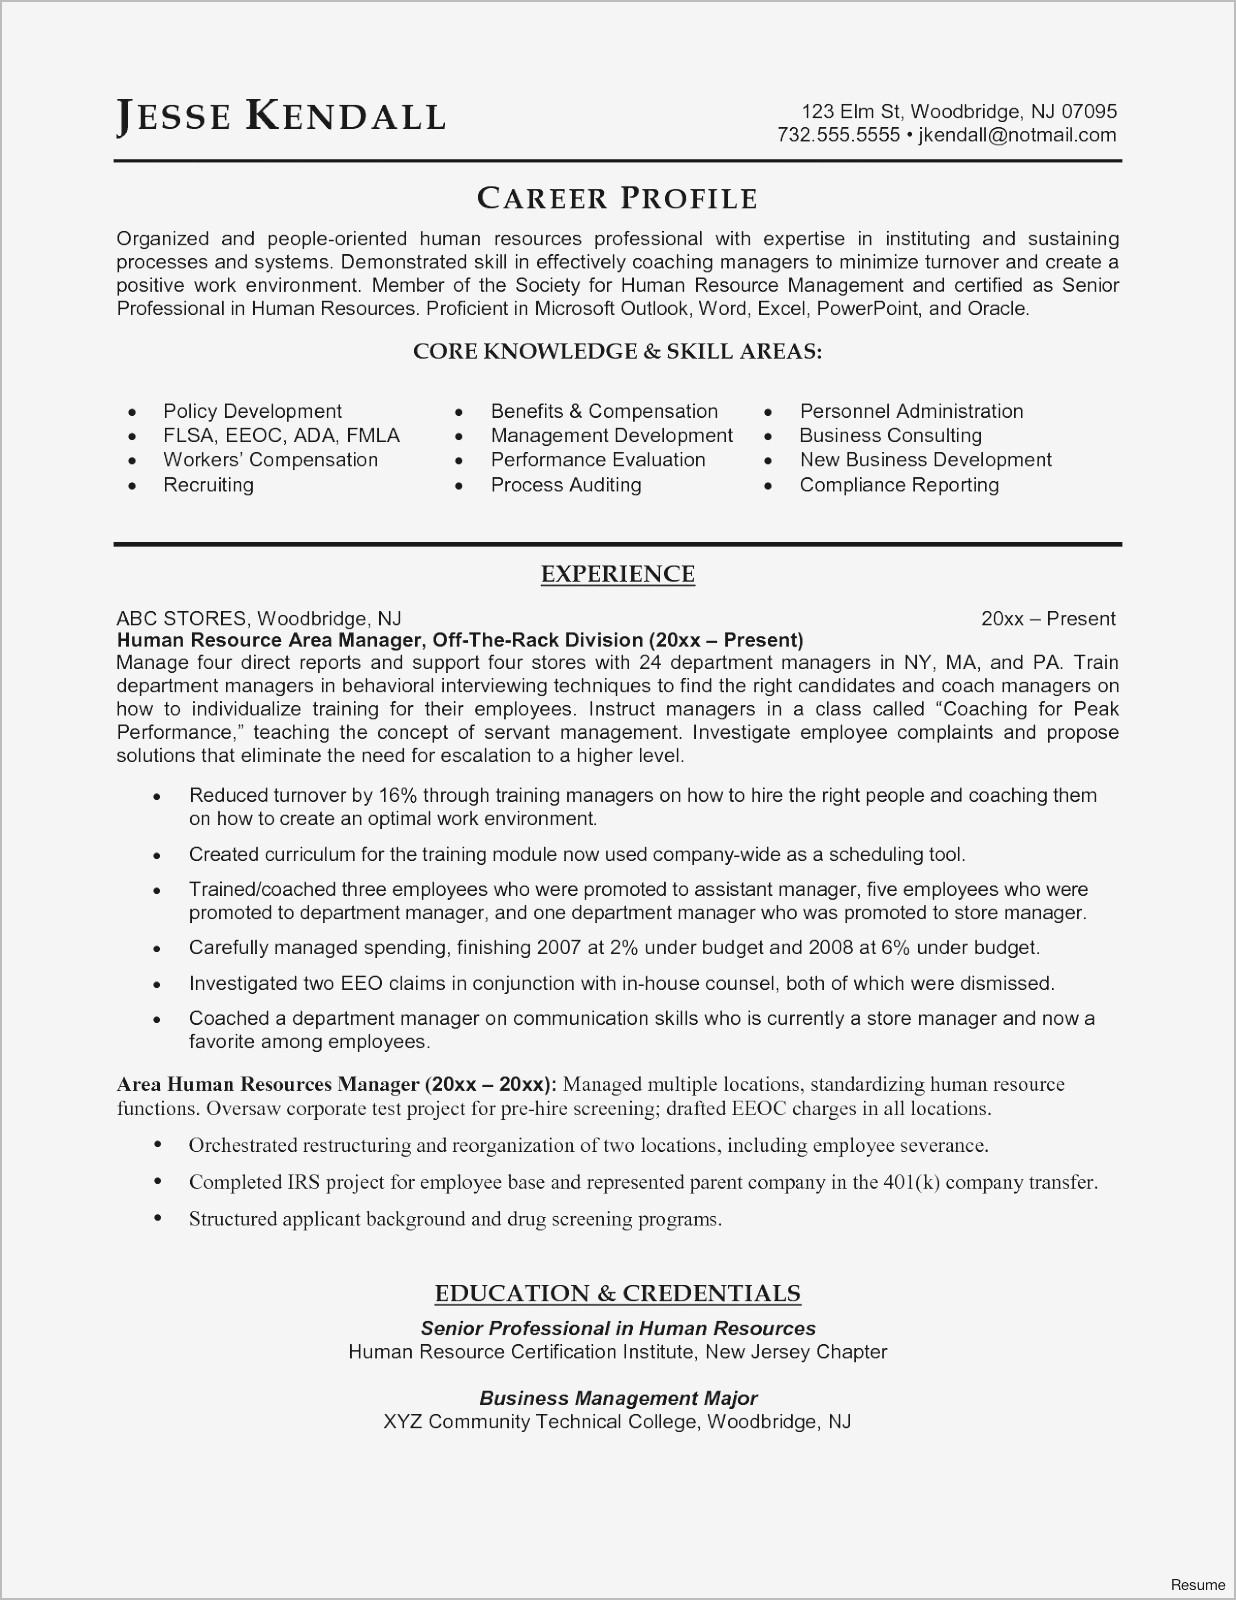 Job Cover Letter Template Word - Resume Cover Letter Template Word Ideas